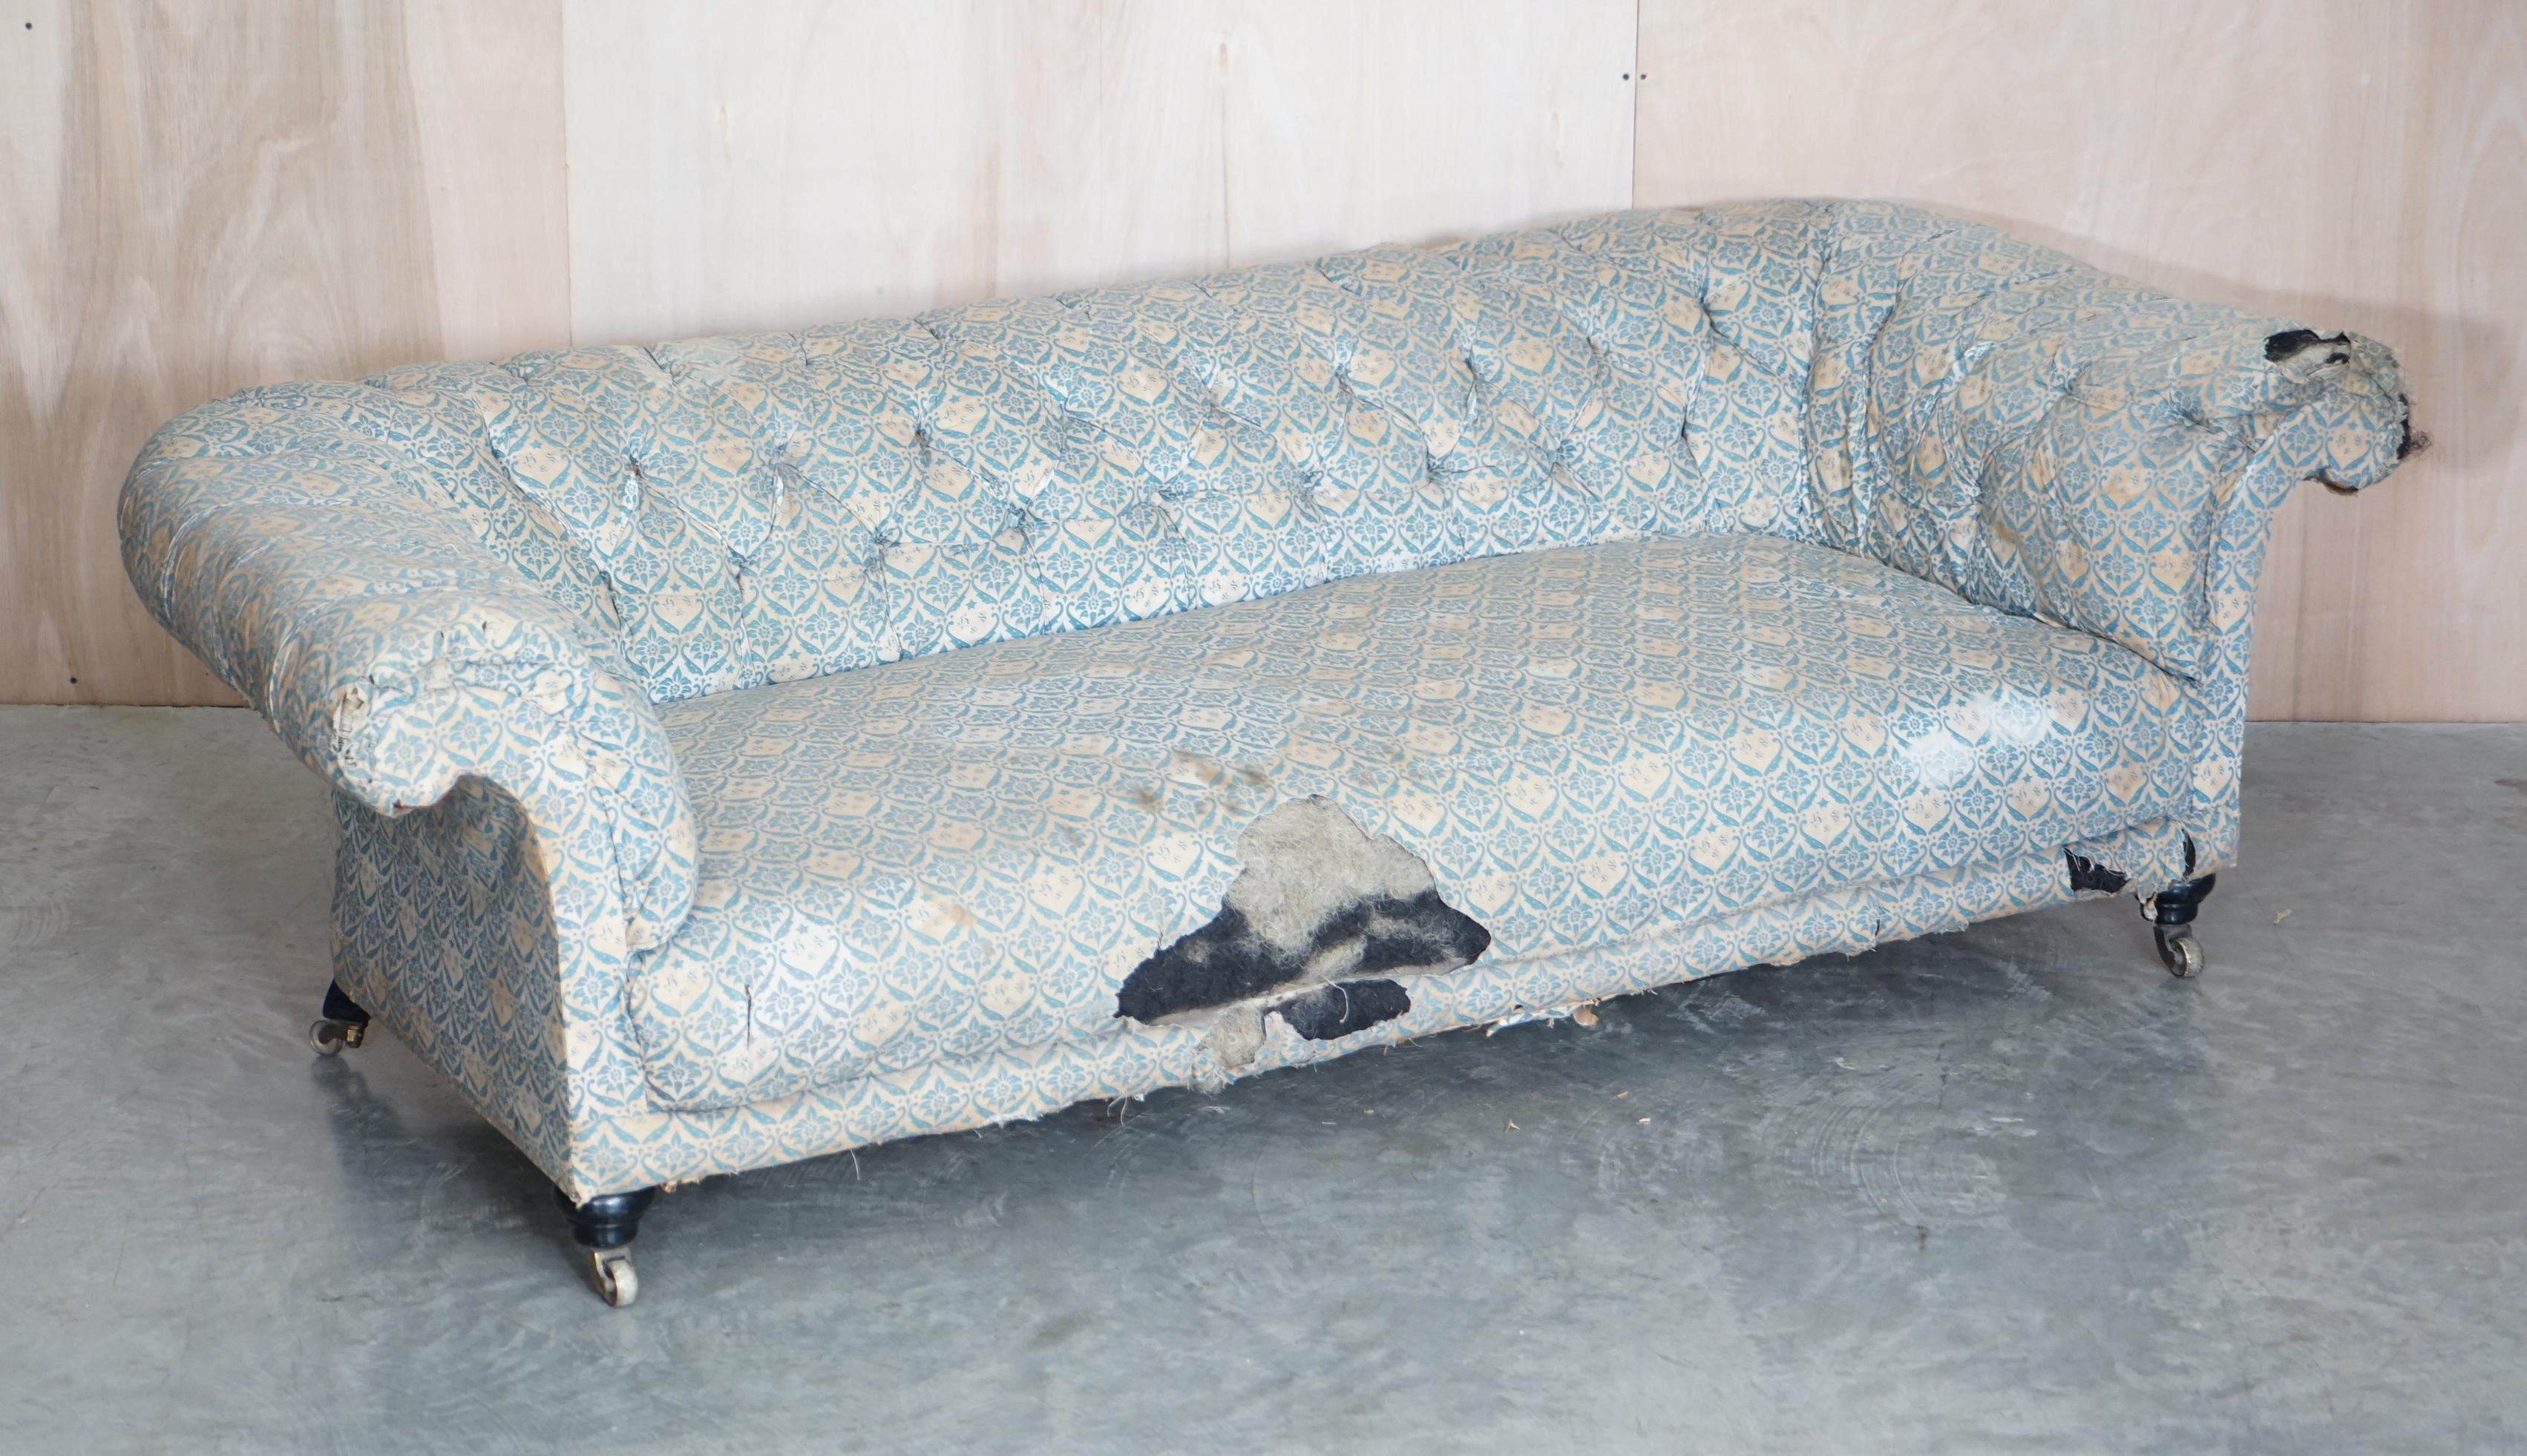 English Unrestored Antique Victorian Howard & Son's Chesterfield Sofa Inc Ticking Fabric For Sale